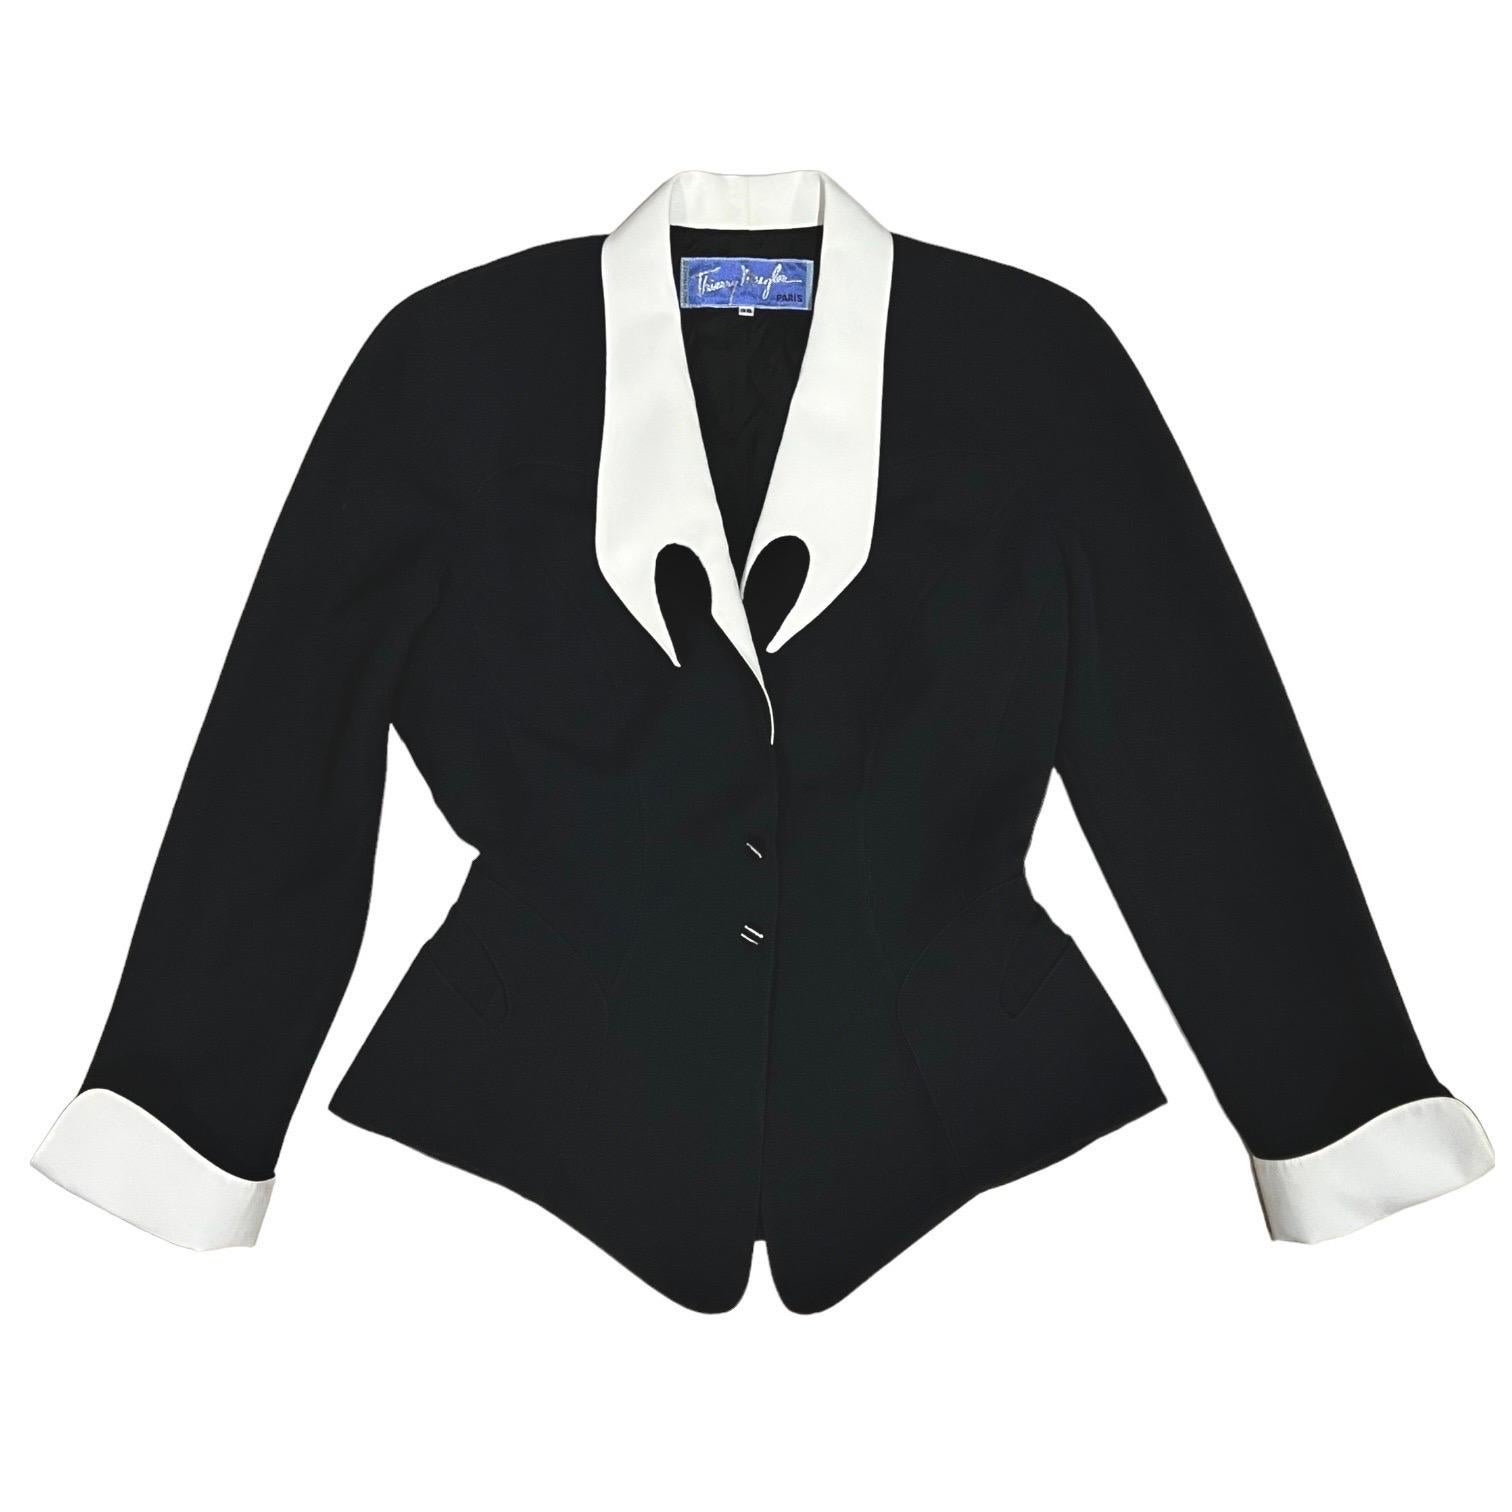 S/S 1992 Thierry Mugler Black Runway Jacket Dramatic White Collar For Sale 4